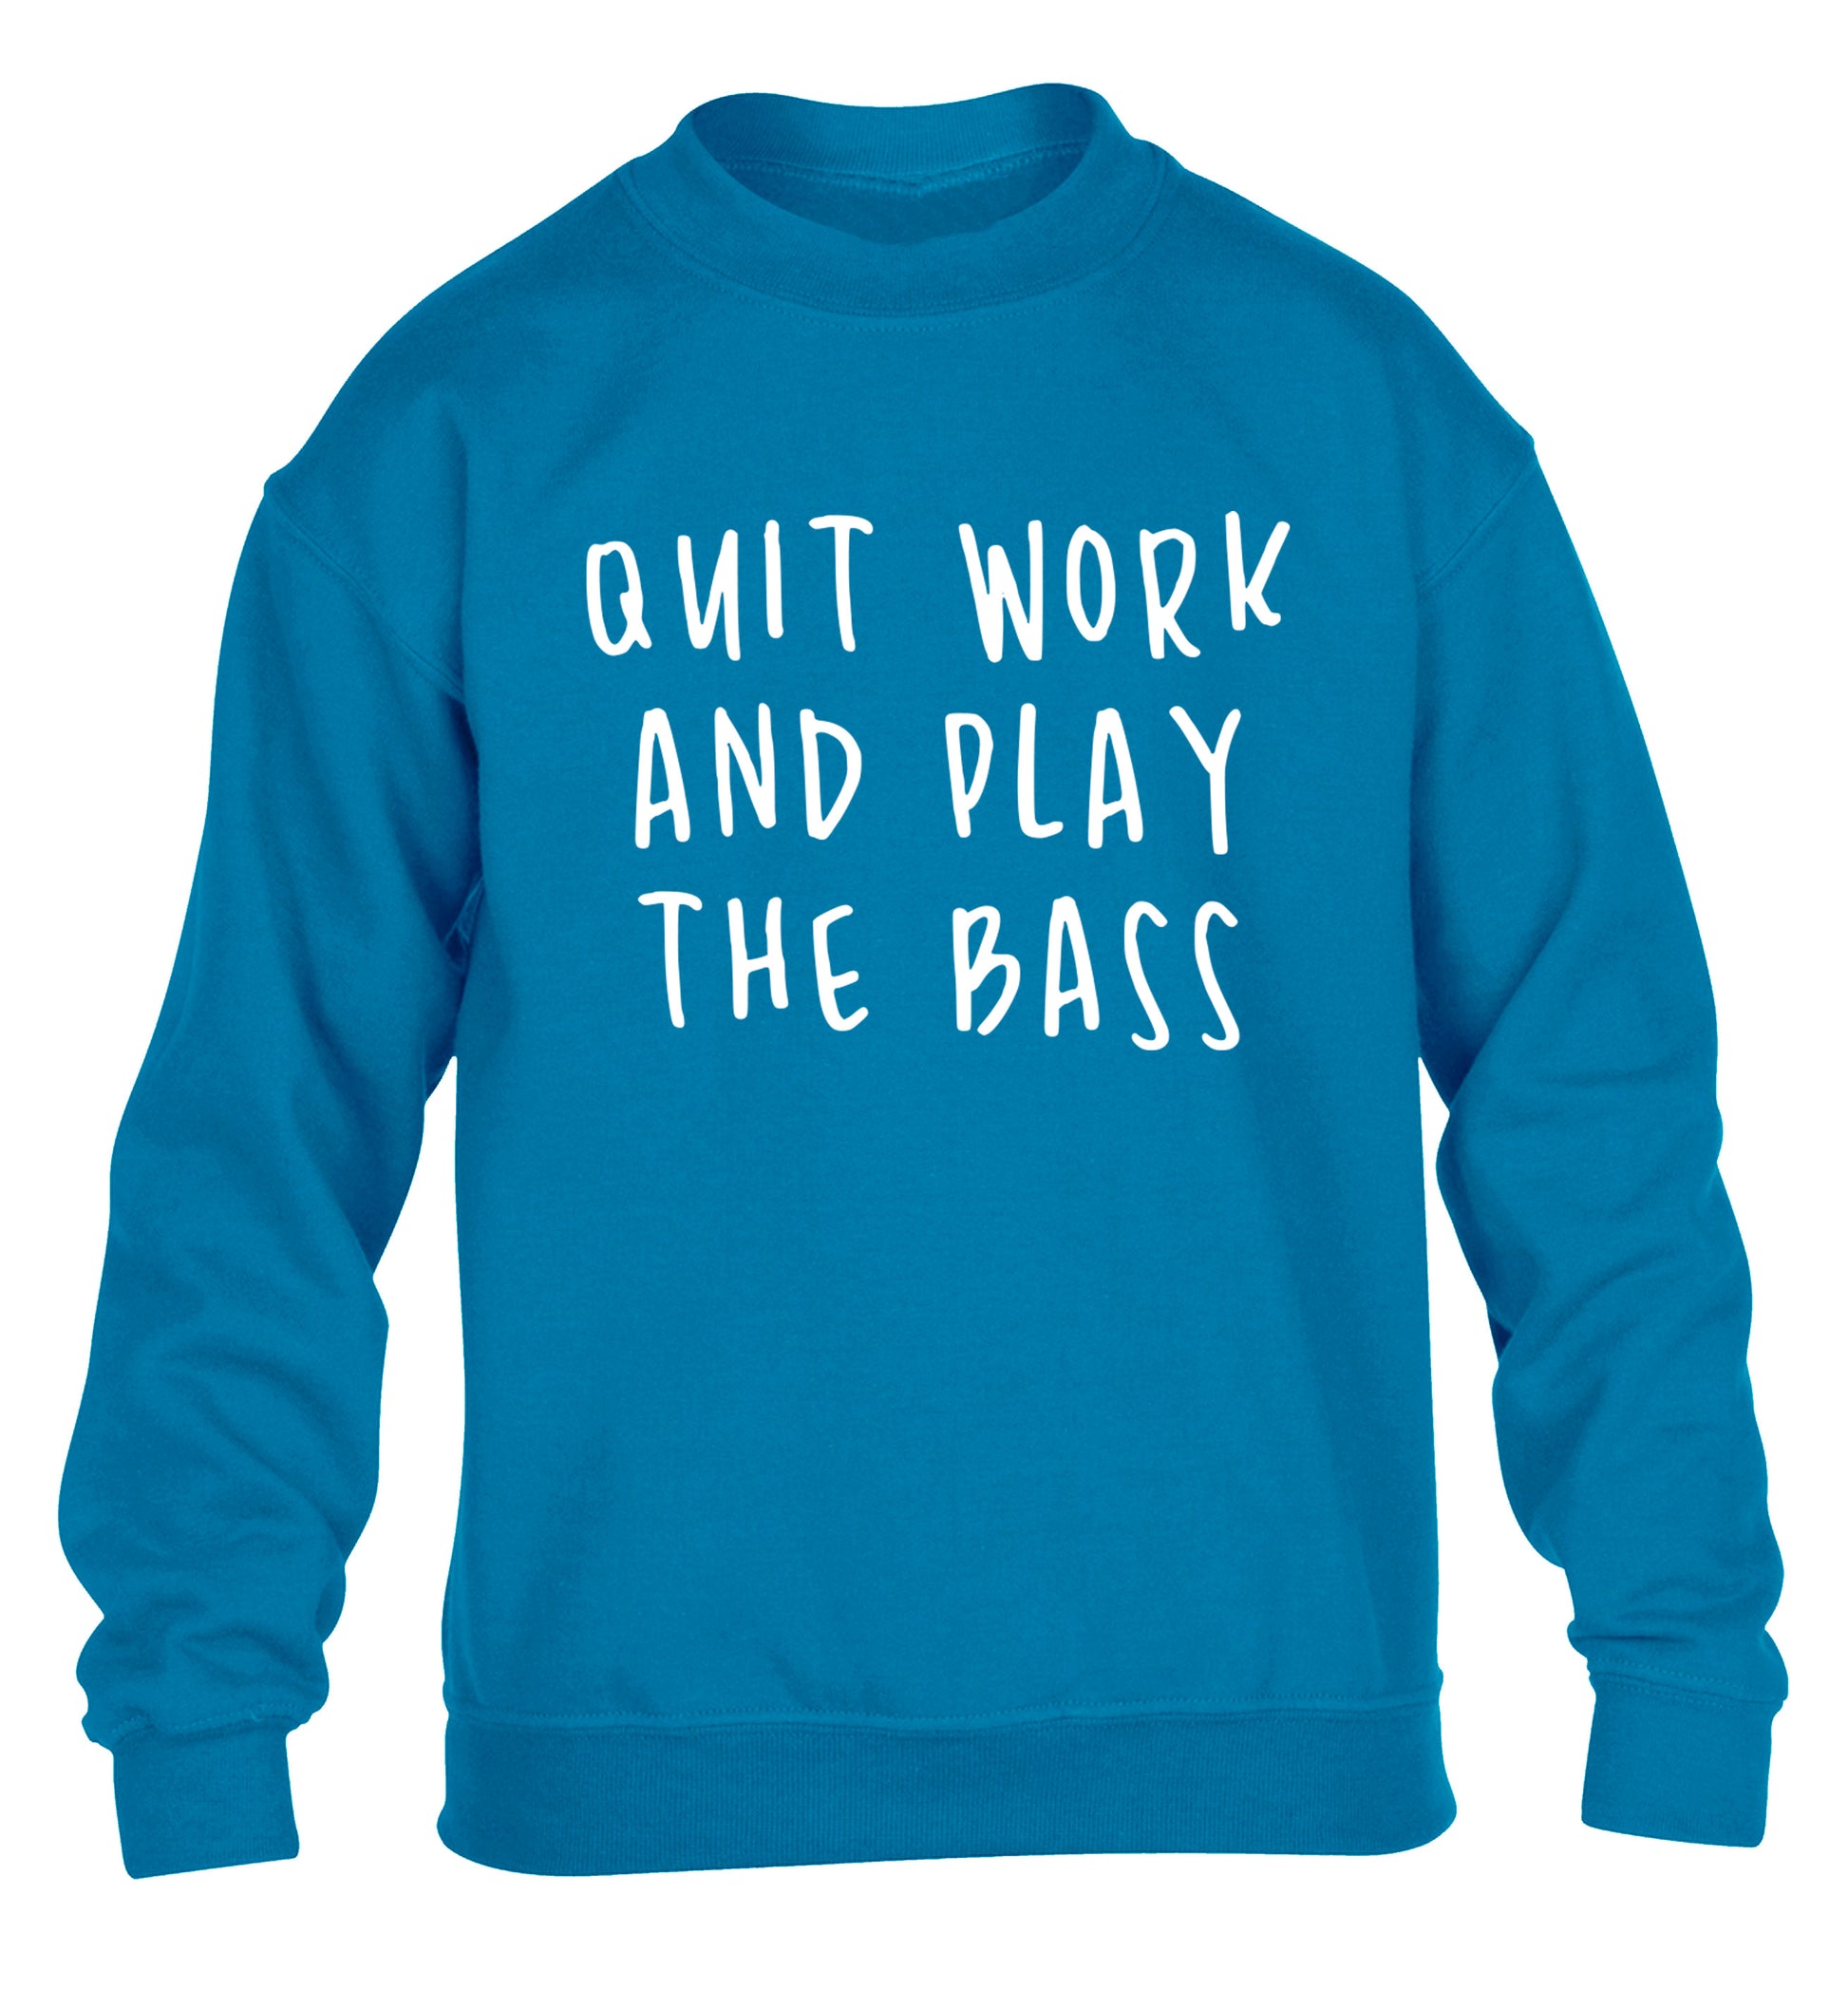 Quit work and play the bass children's blue sweater 12-14 Years